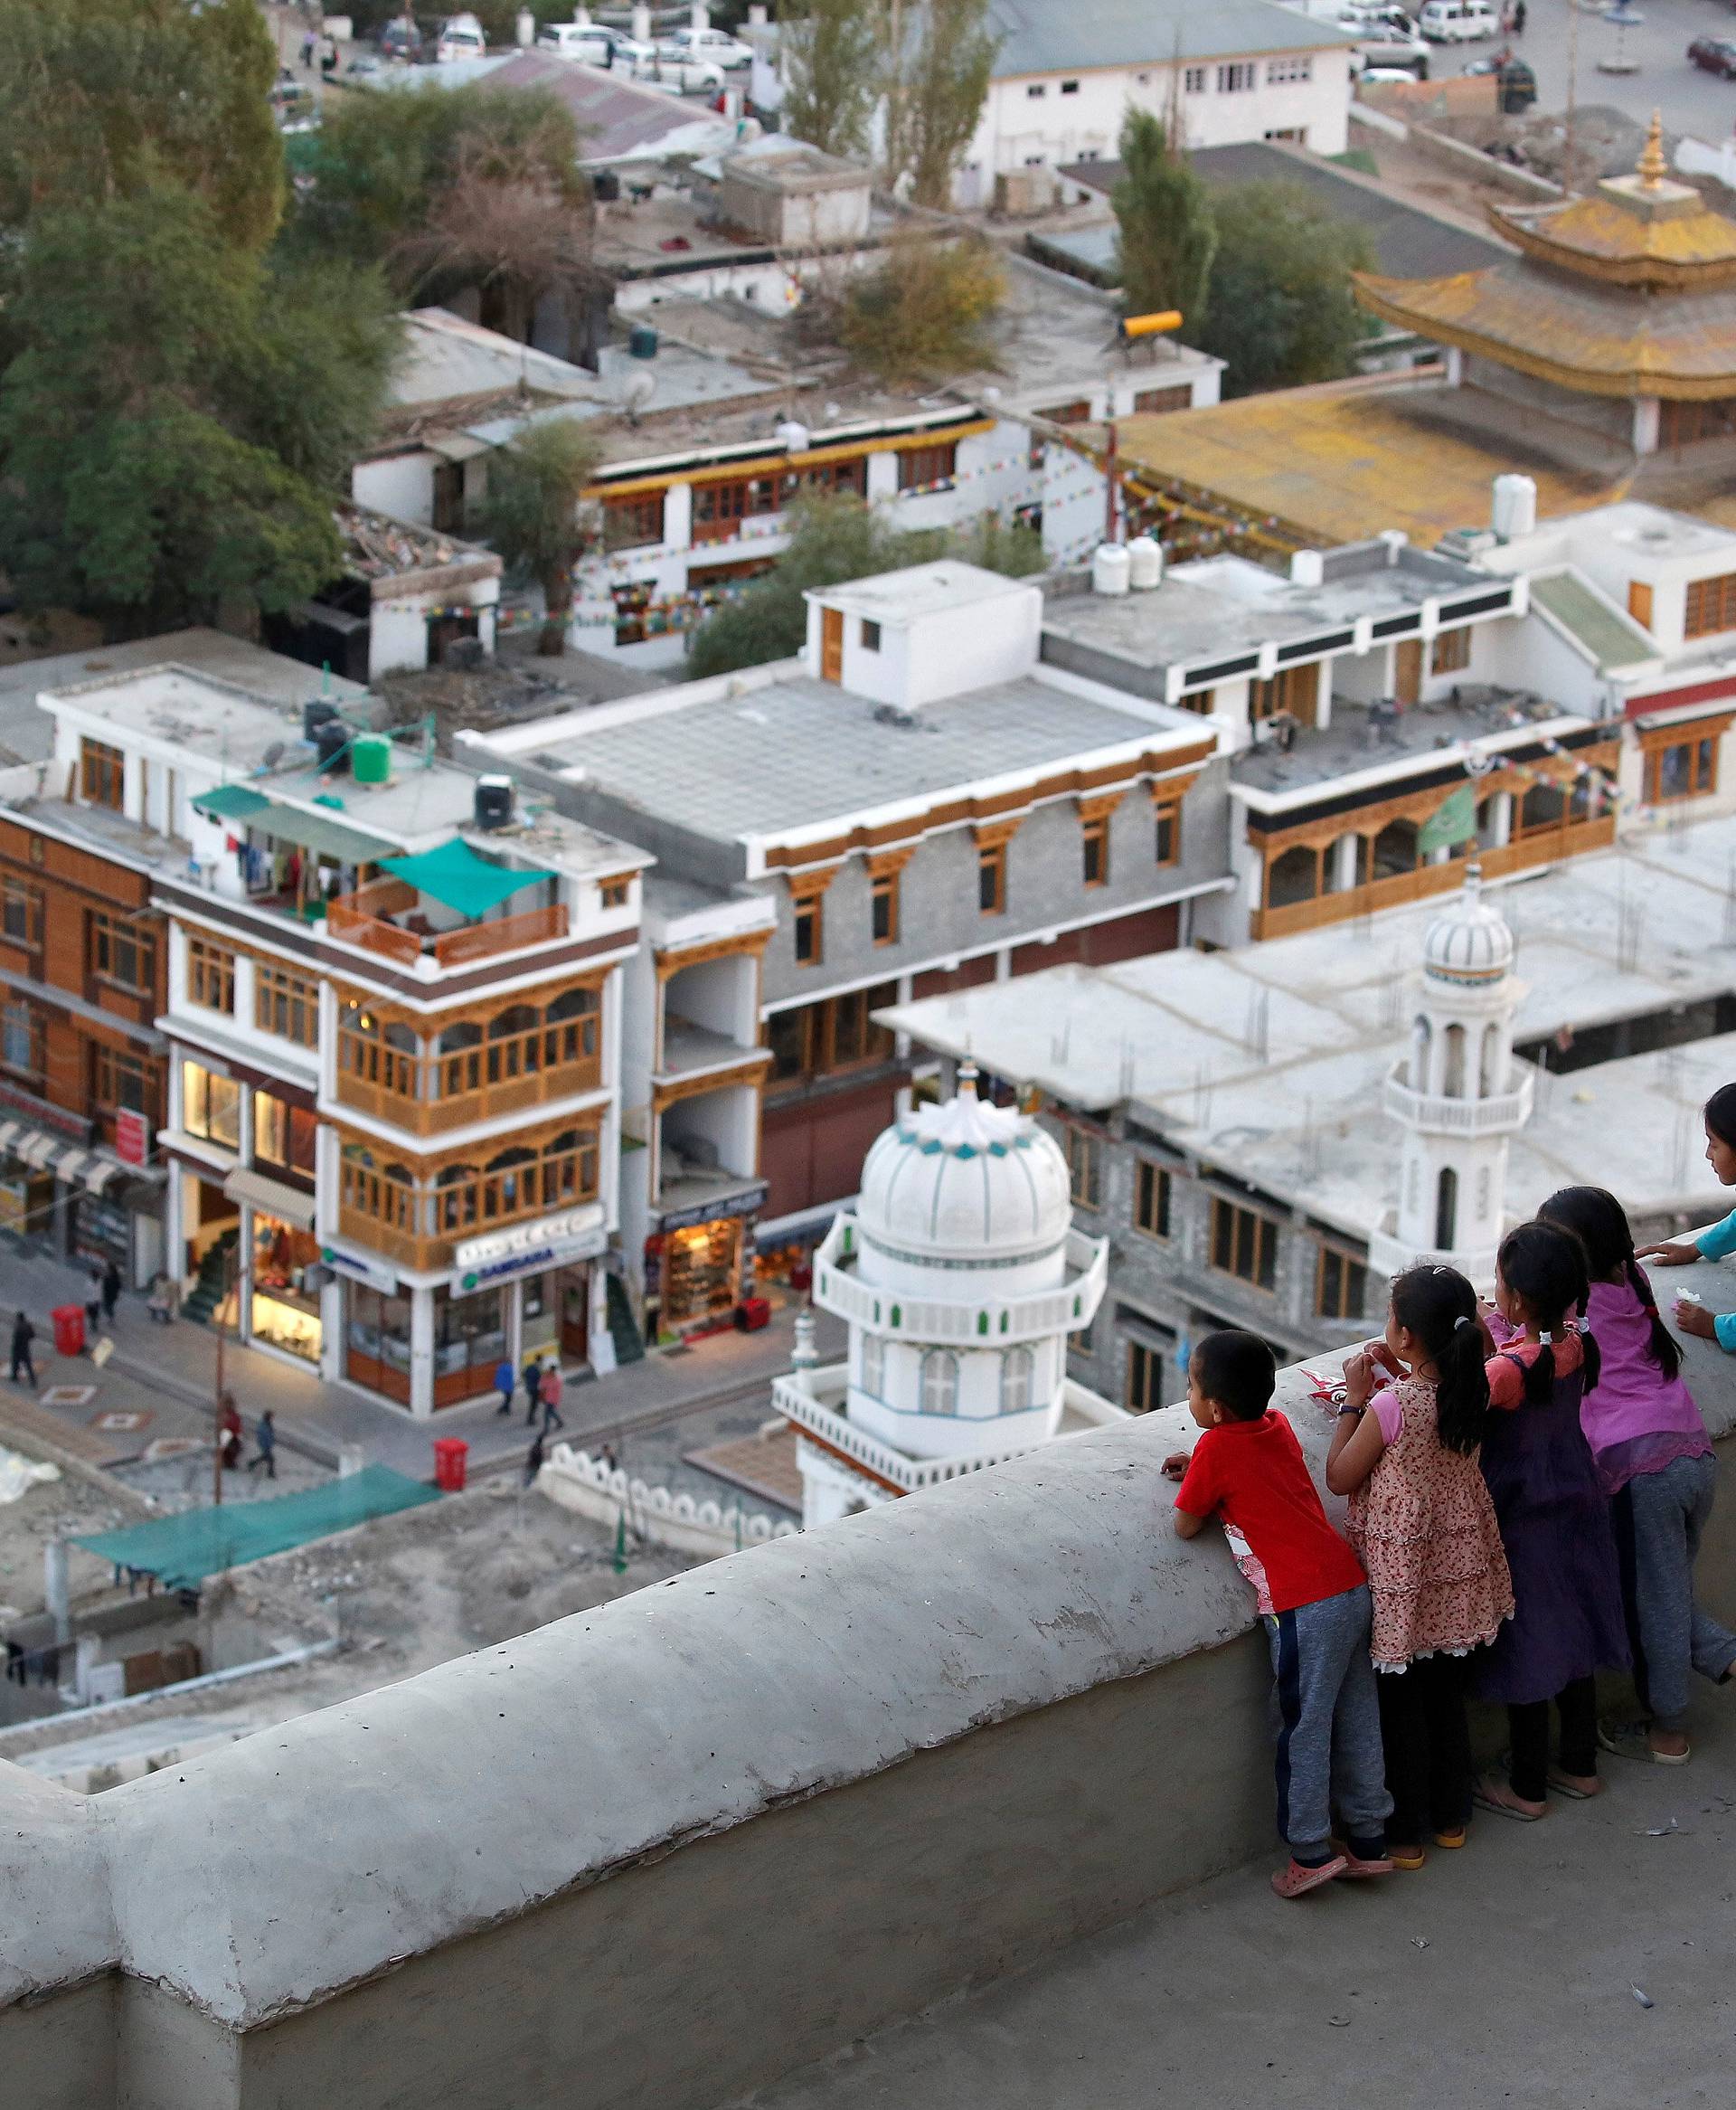 The Wider Image: Tradition and tourism in the Indian Himalayas